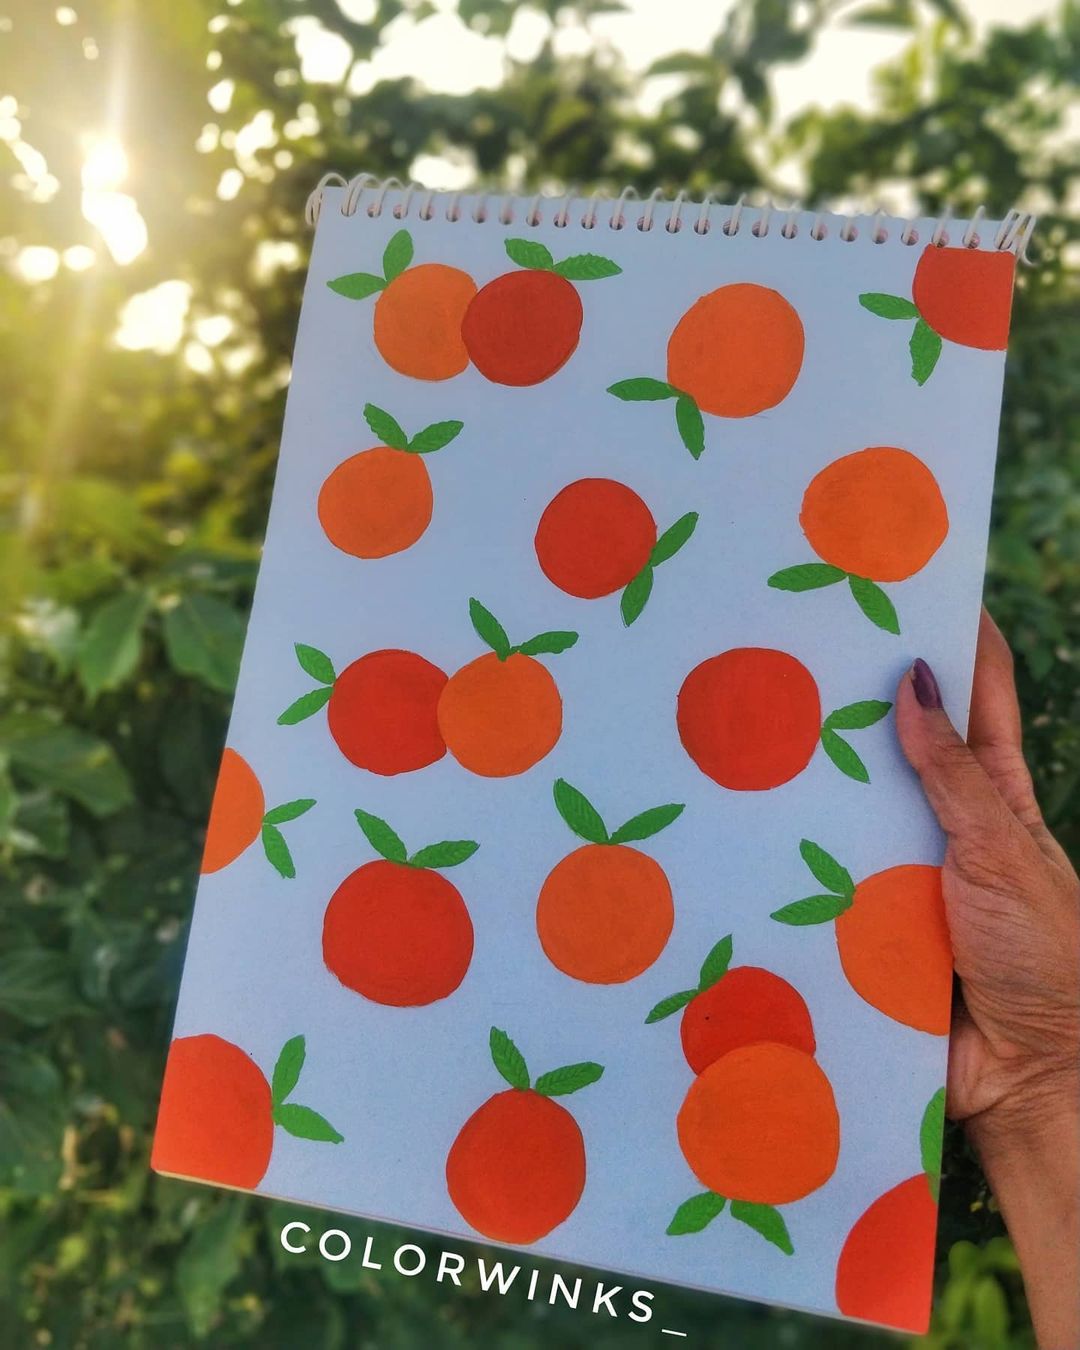 9. Bright orange pattern on white sketch paper held against a leafy background